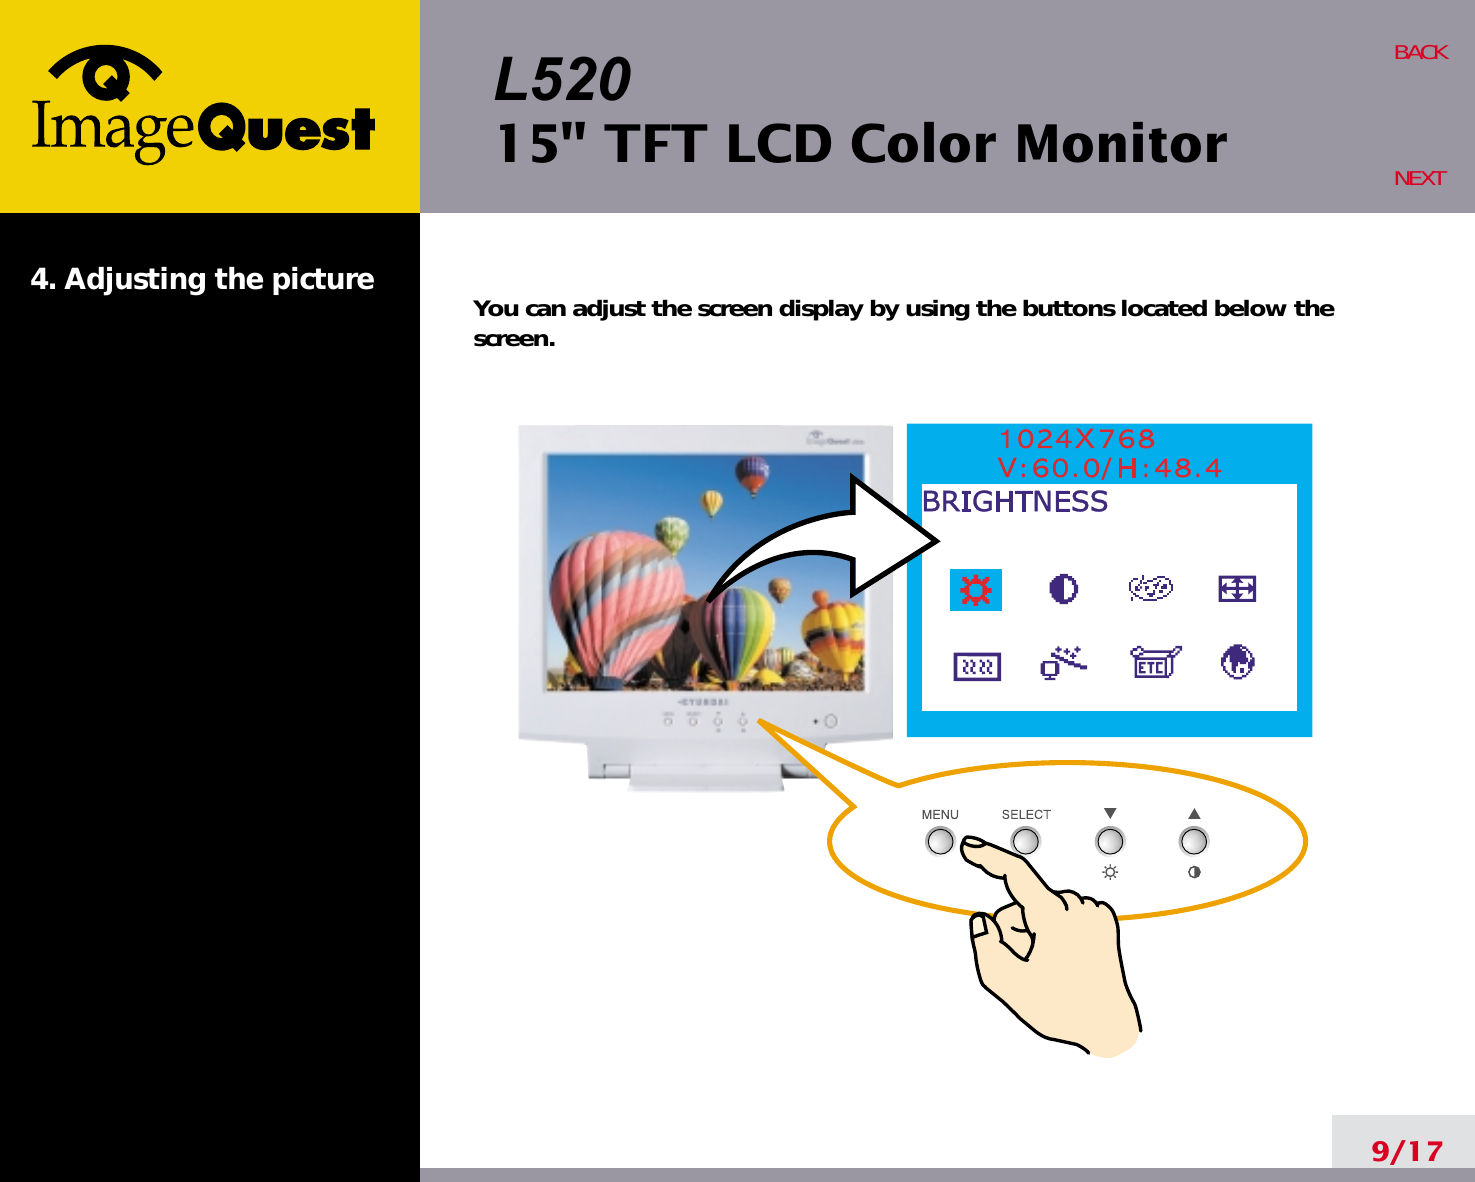 L52015&quot; TFT LCD Color Monitor4. Adjusting the picture9/17BACKNEXTYou can adjust the screen display by using the buttons located below thescreen.